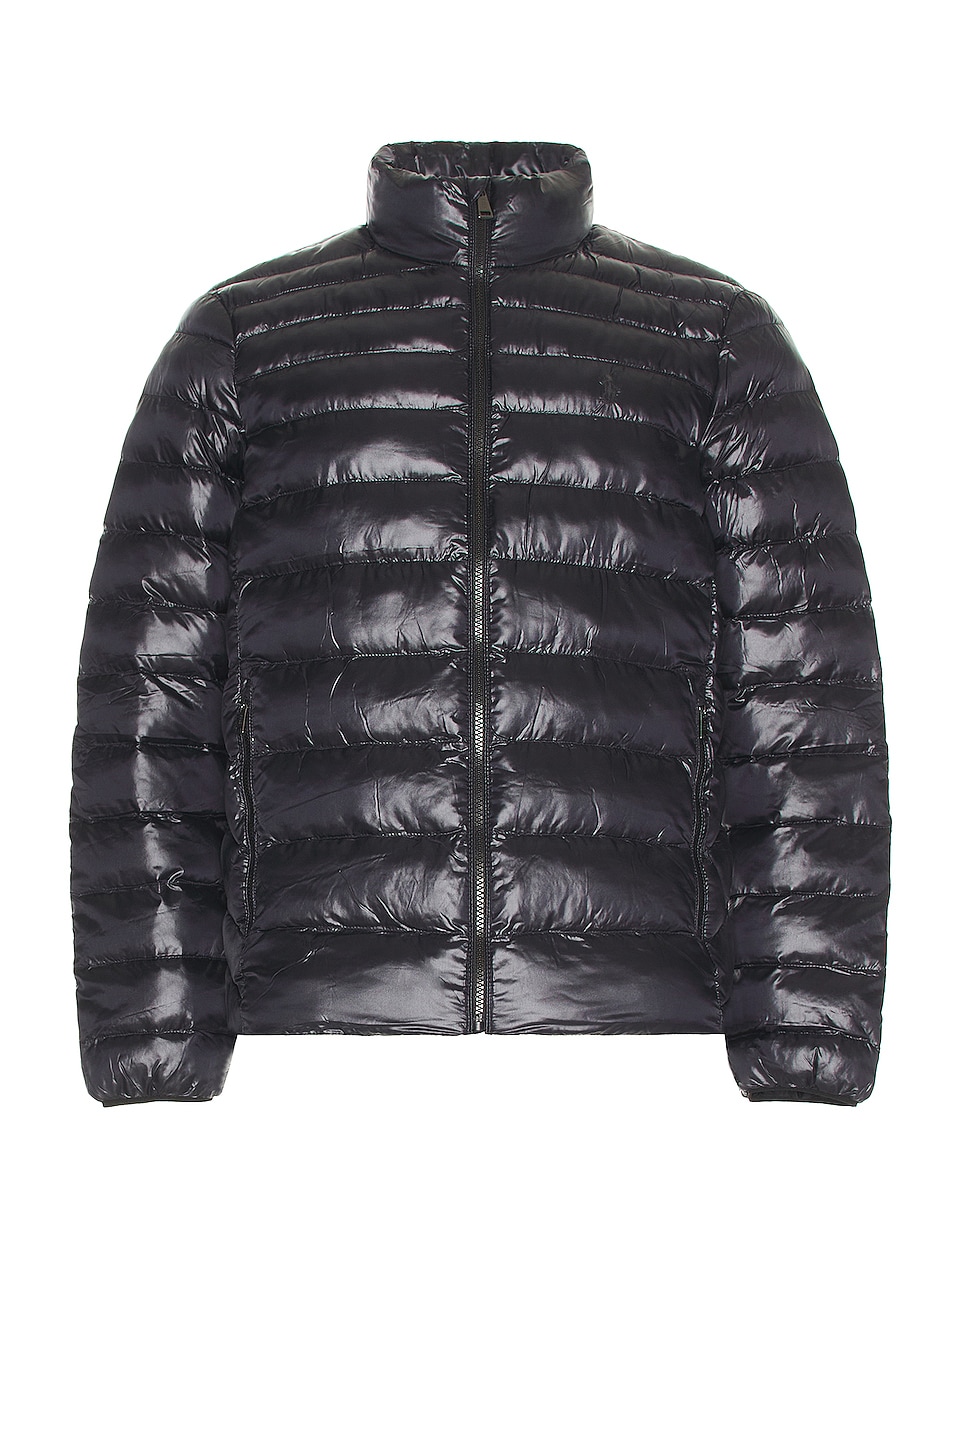 Polo Ralph Lauren Packable Jacket in Polo Black Glossy | REVOLVE